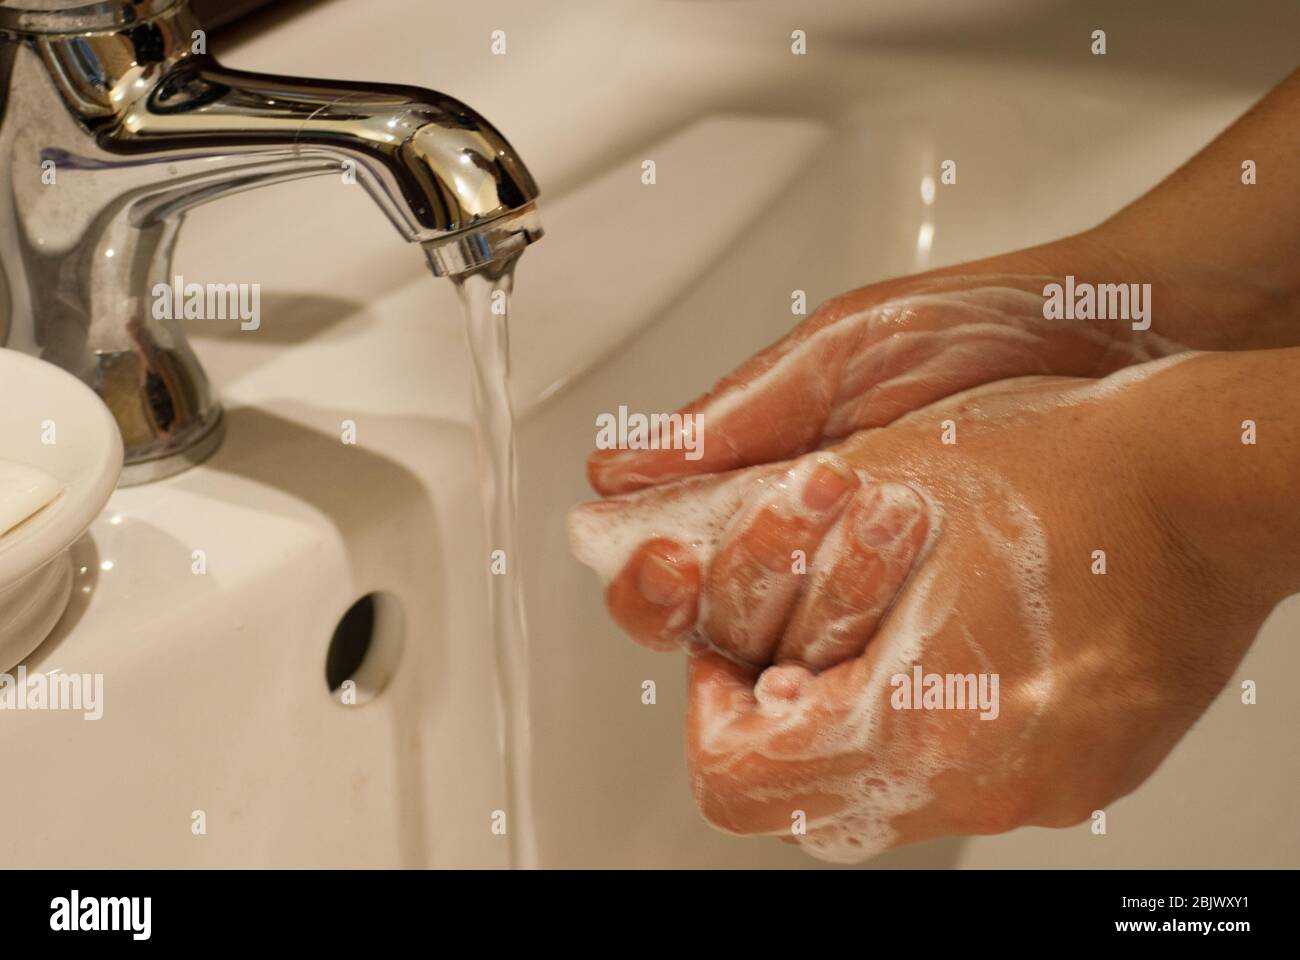 Washing hands carefully: one of the best way to prevent coronavirus transmission. Stock Photo